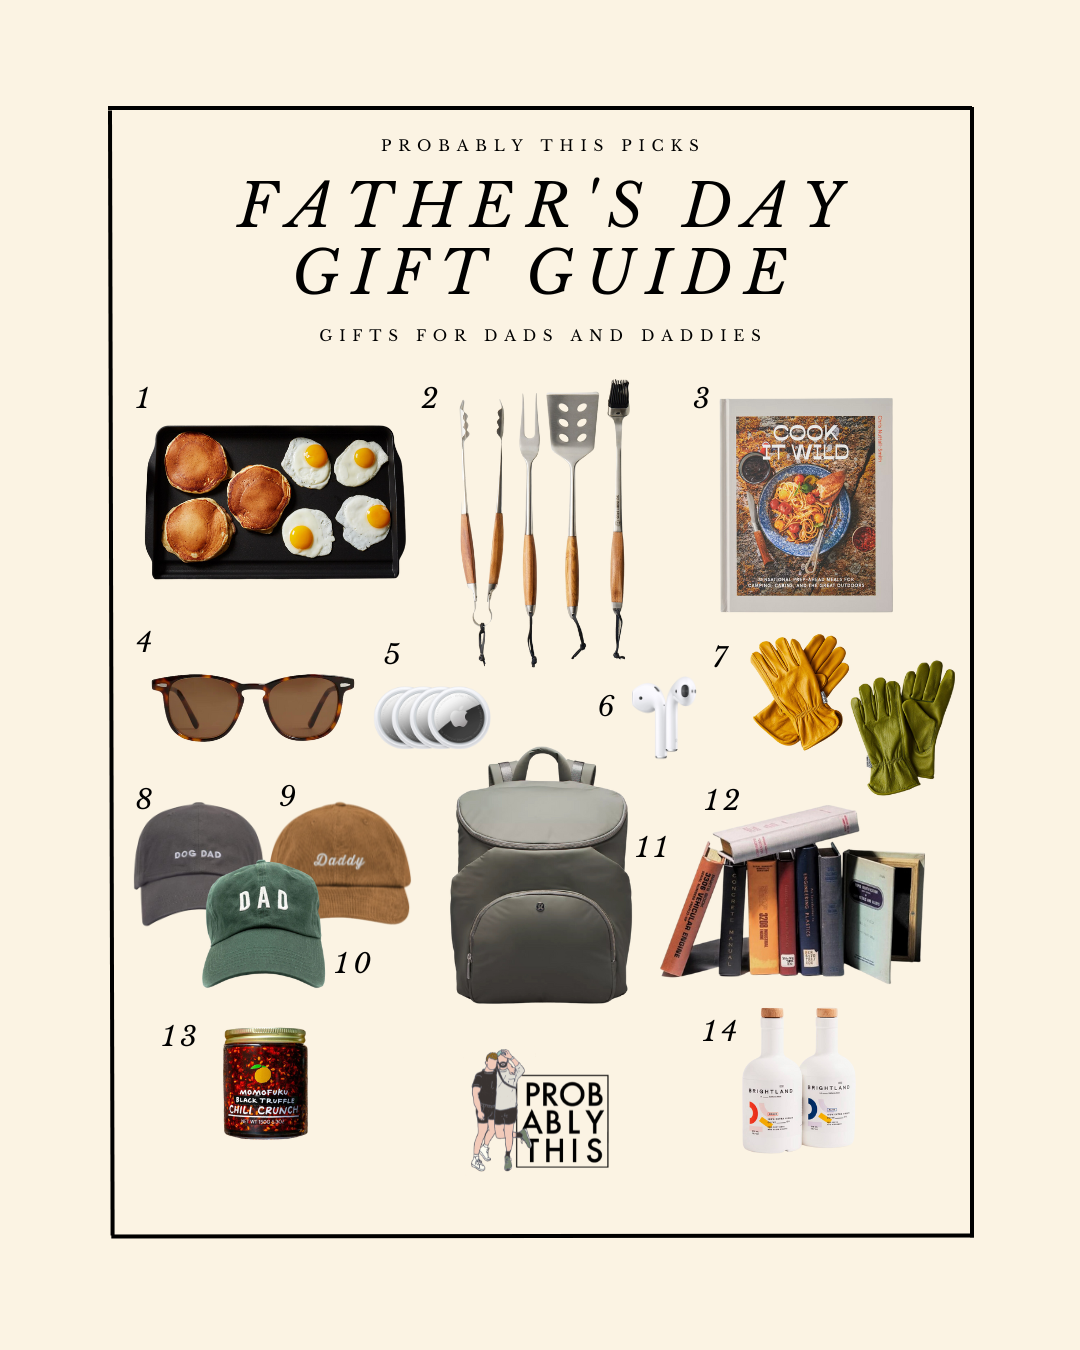 Father's Day Giveaway, Memorable Gifts Blog